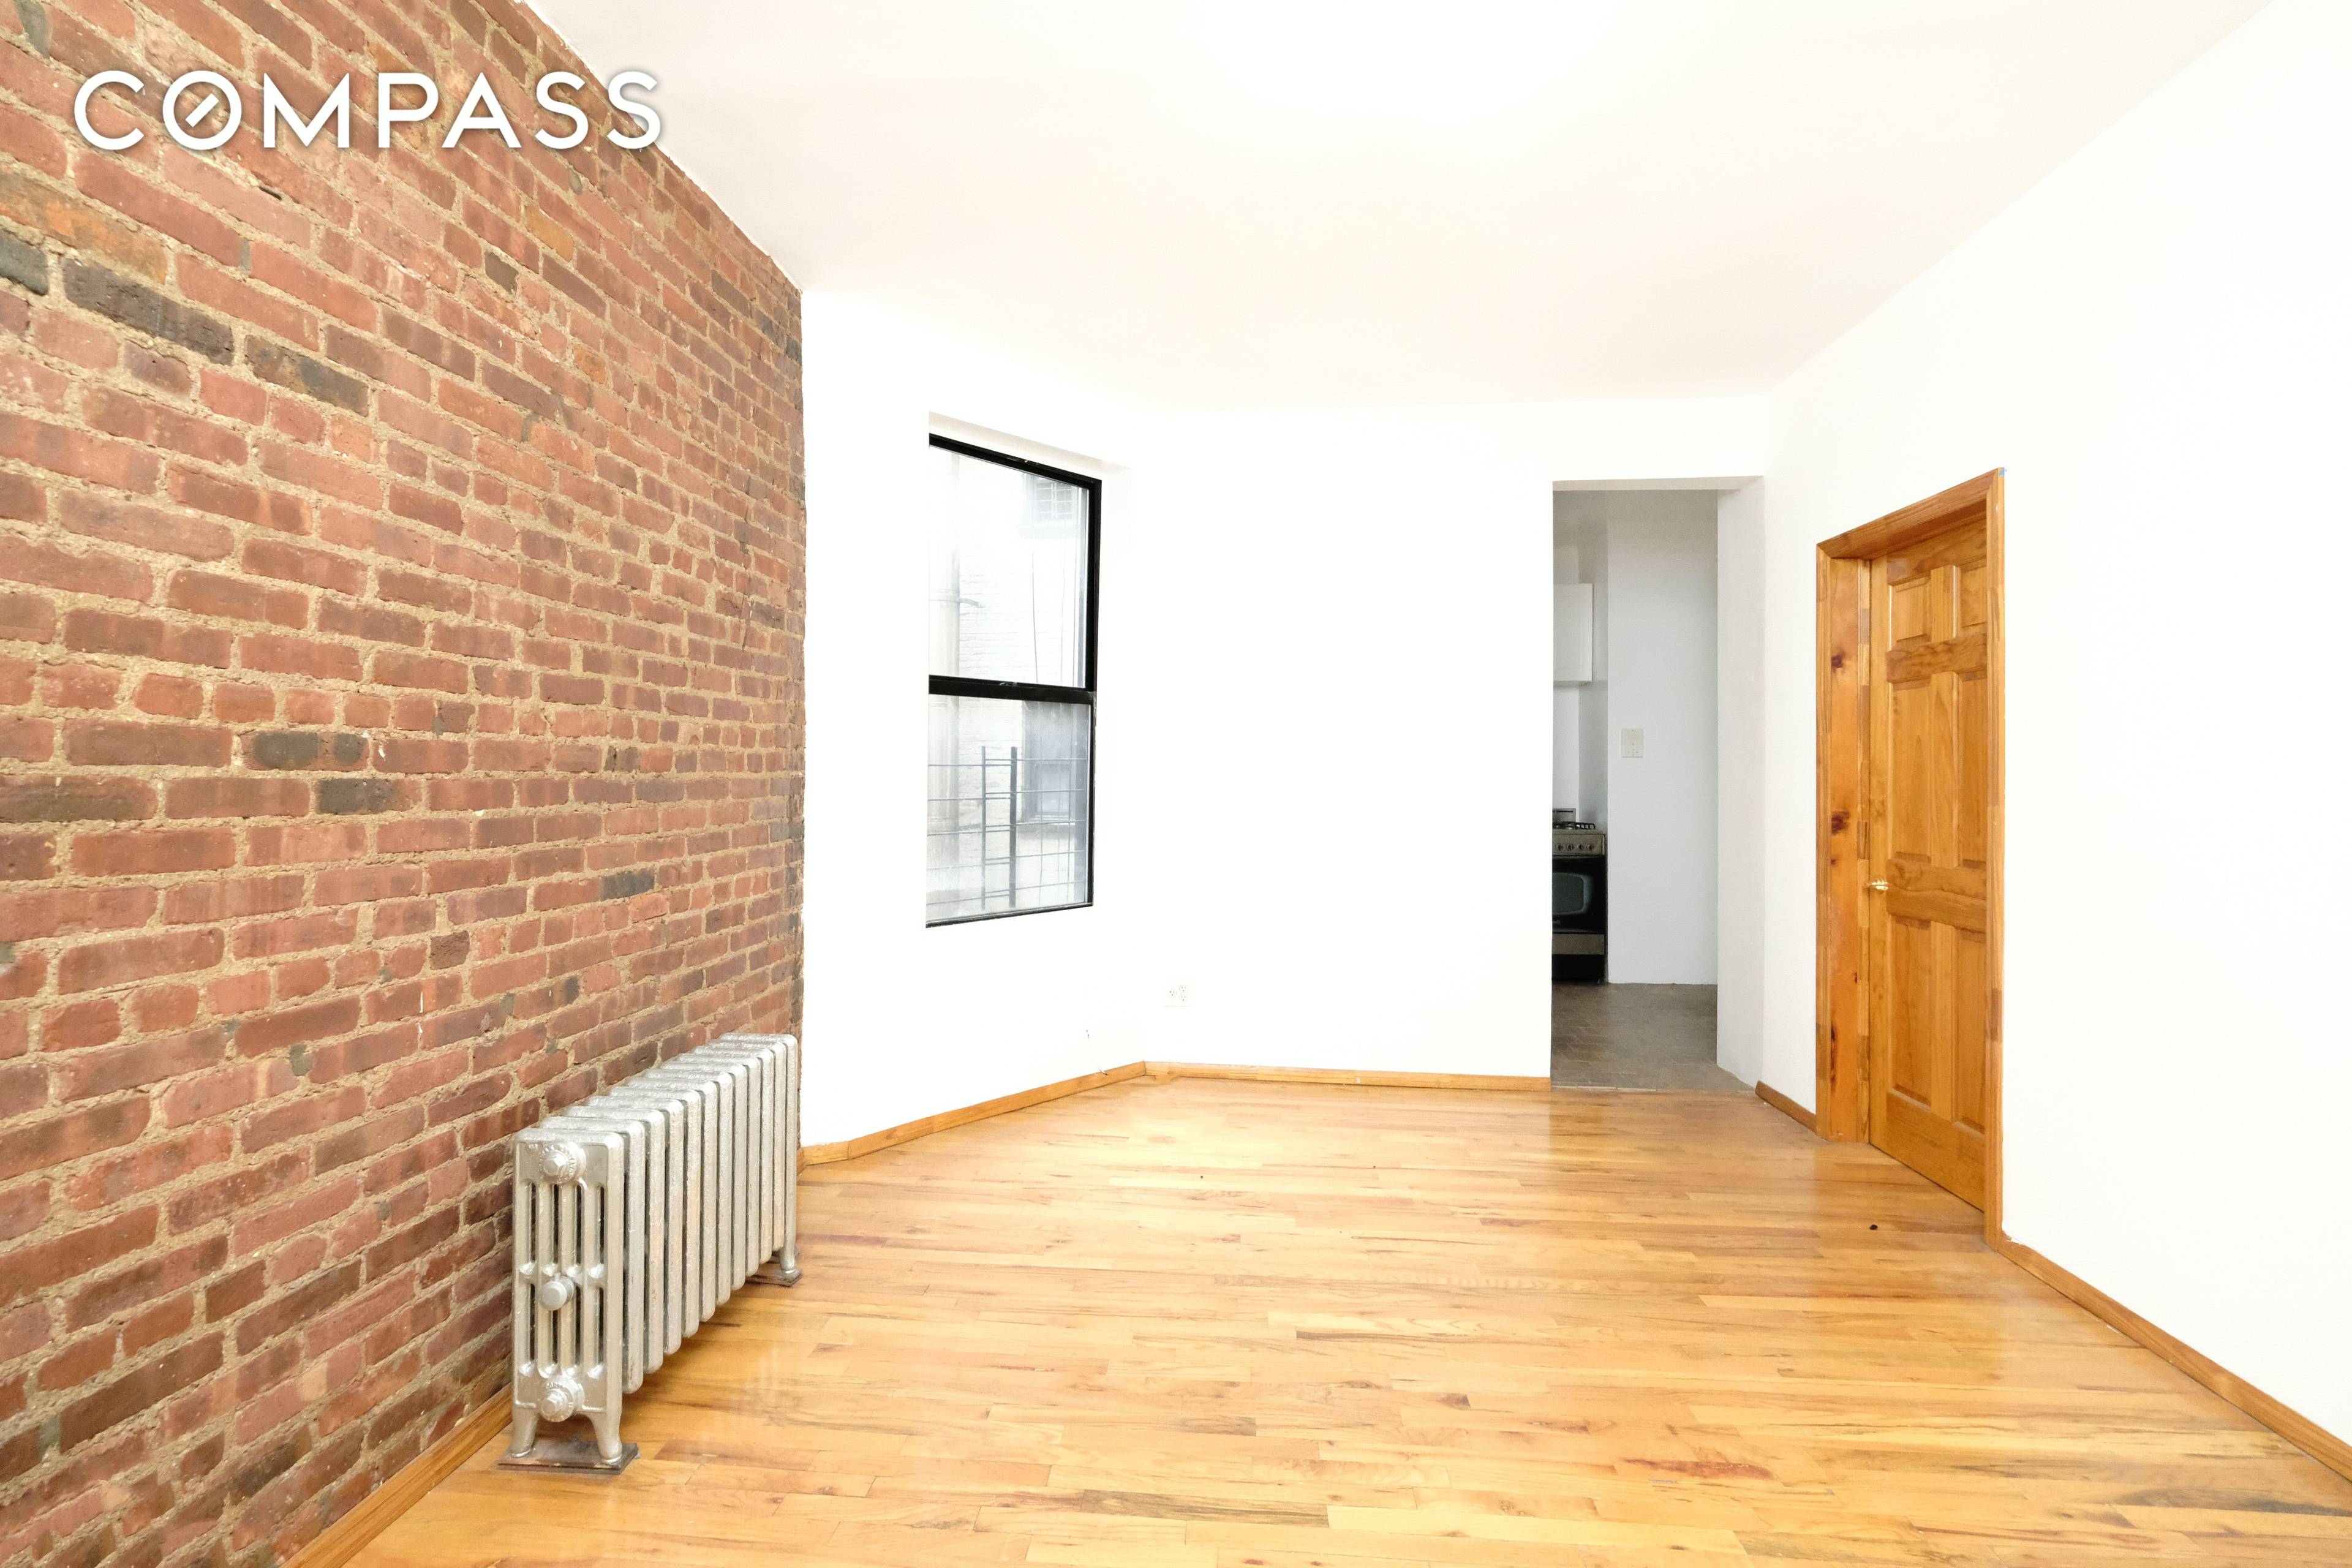 NO FEE 3 BED 1 BATH Virtual tours and in person viewings BY APPOINTMENT ONLY Apt Details 3 Bedrooms 1 Bath Stainless Steel Appliances Dishwasher in unit Exposed Brick 1st ...